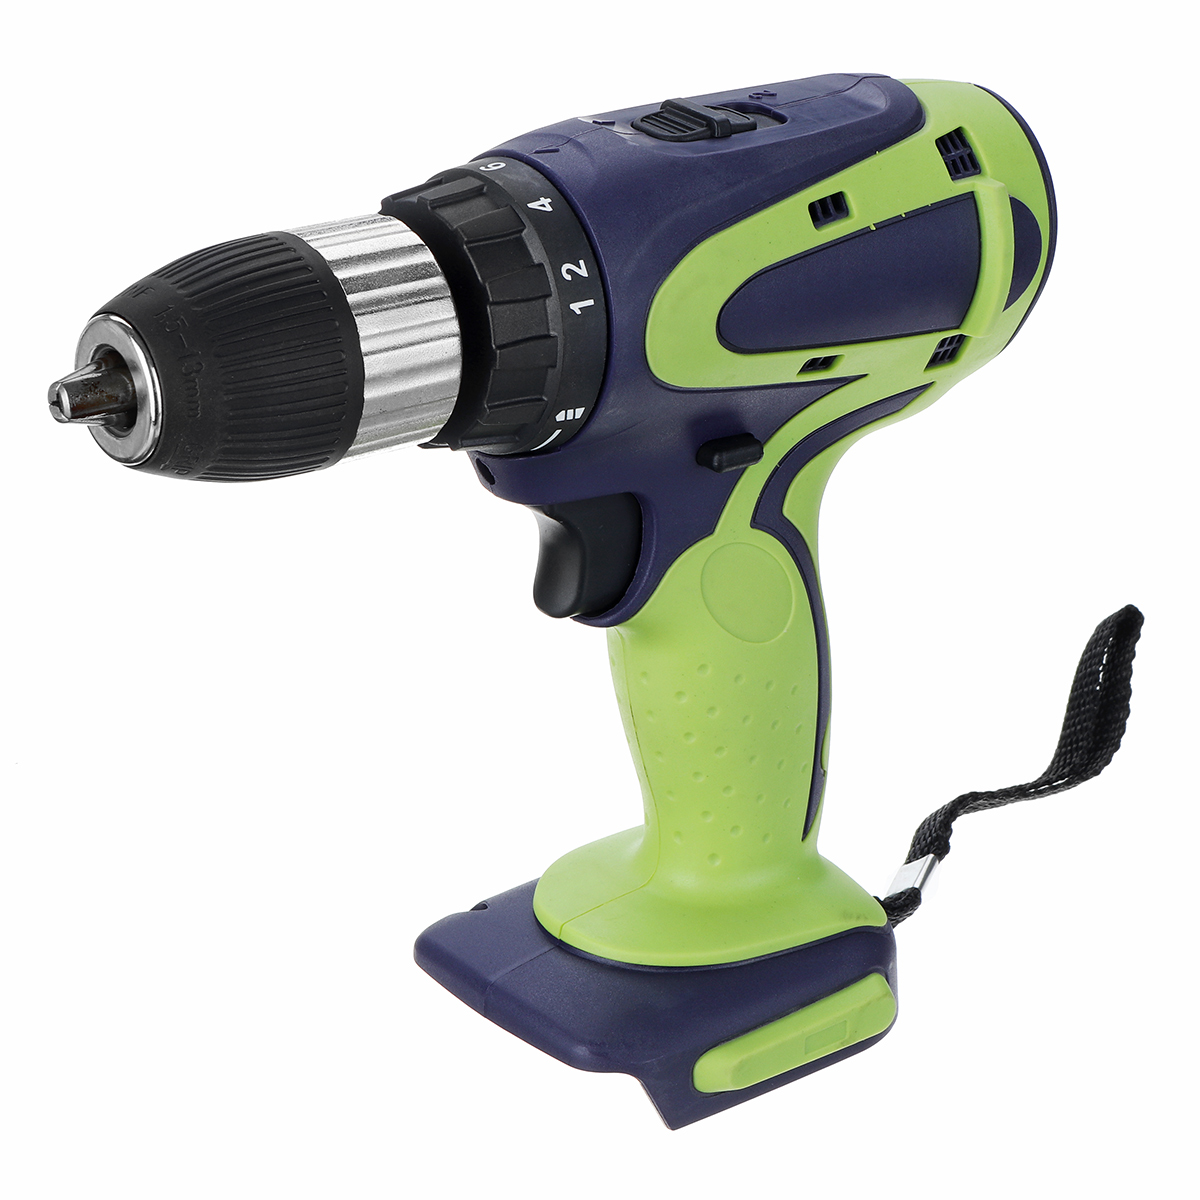 13mm-Chuck-Cordless-Electric-Drill-For-Makita-18V-Battery-4000RPM-LED-Light-Power-Drills-350Nm-1642844-7